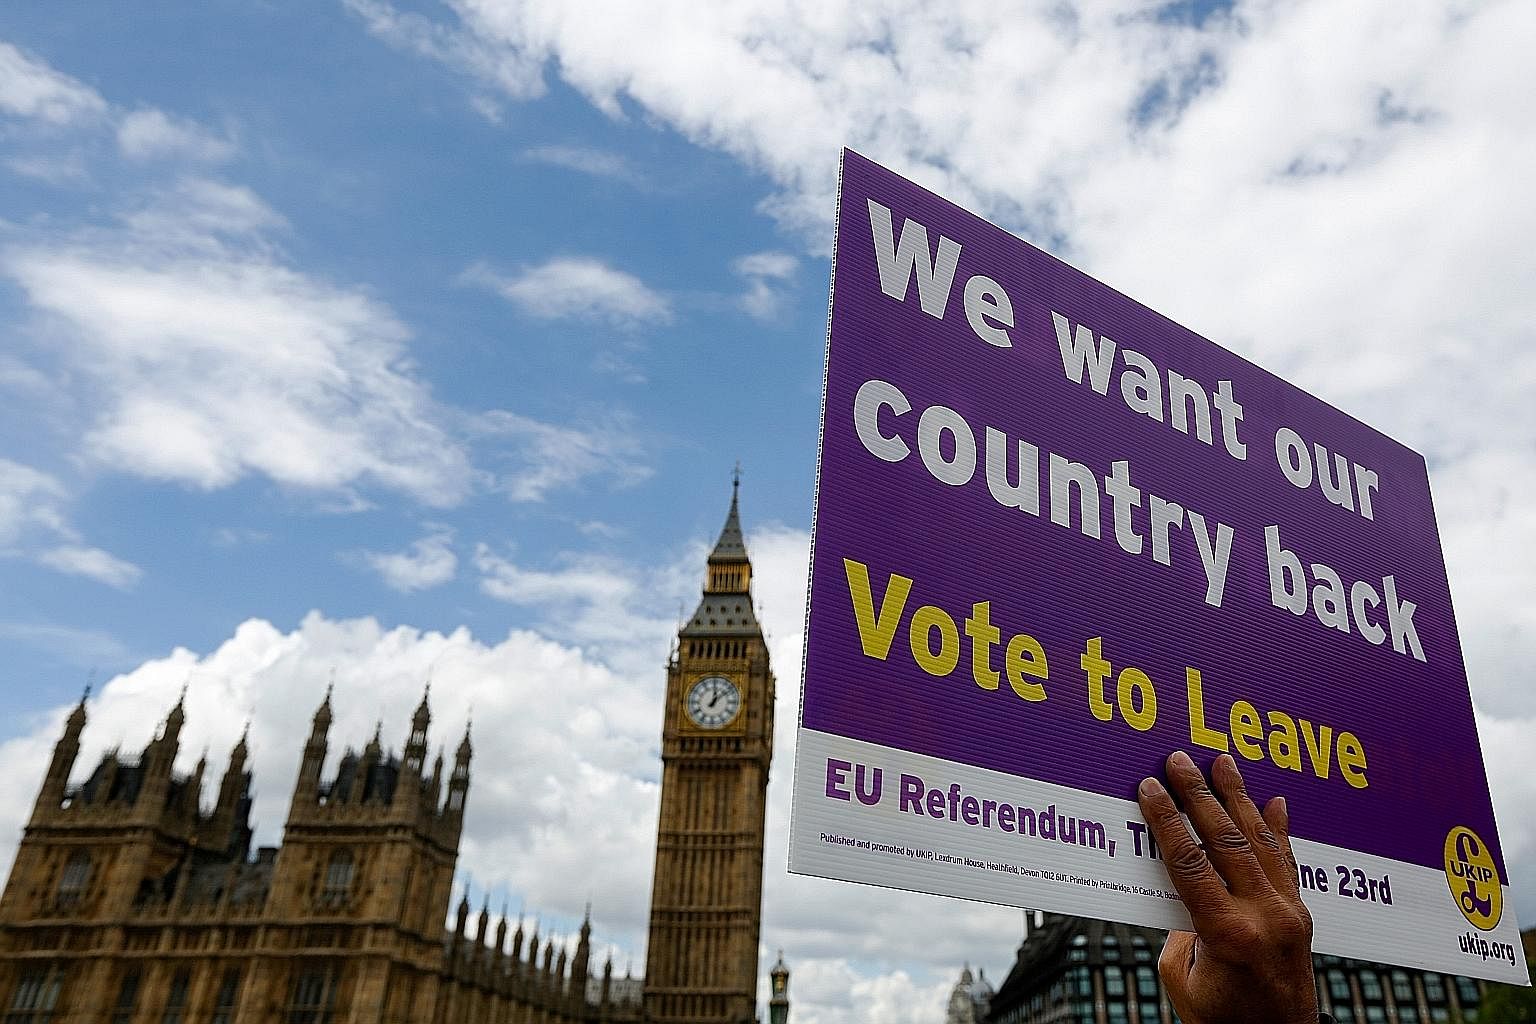 Pro-Brexit supporters say leaving the EU would give Britain control over its laws, especially in immigration. However, on the economic front, the country may be subject to unfavourable deals from the much larger European bloc and the US.